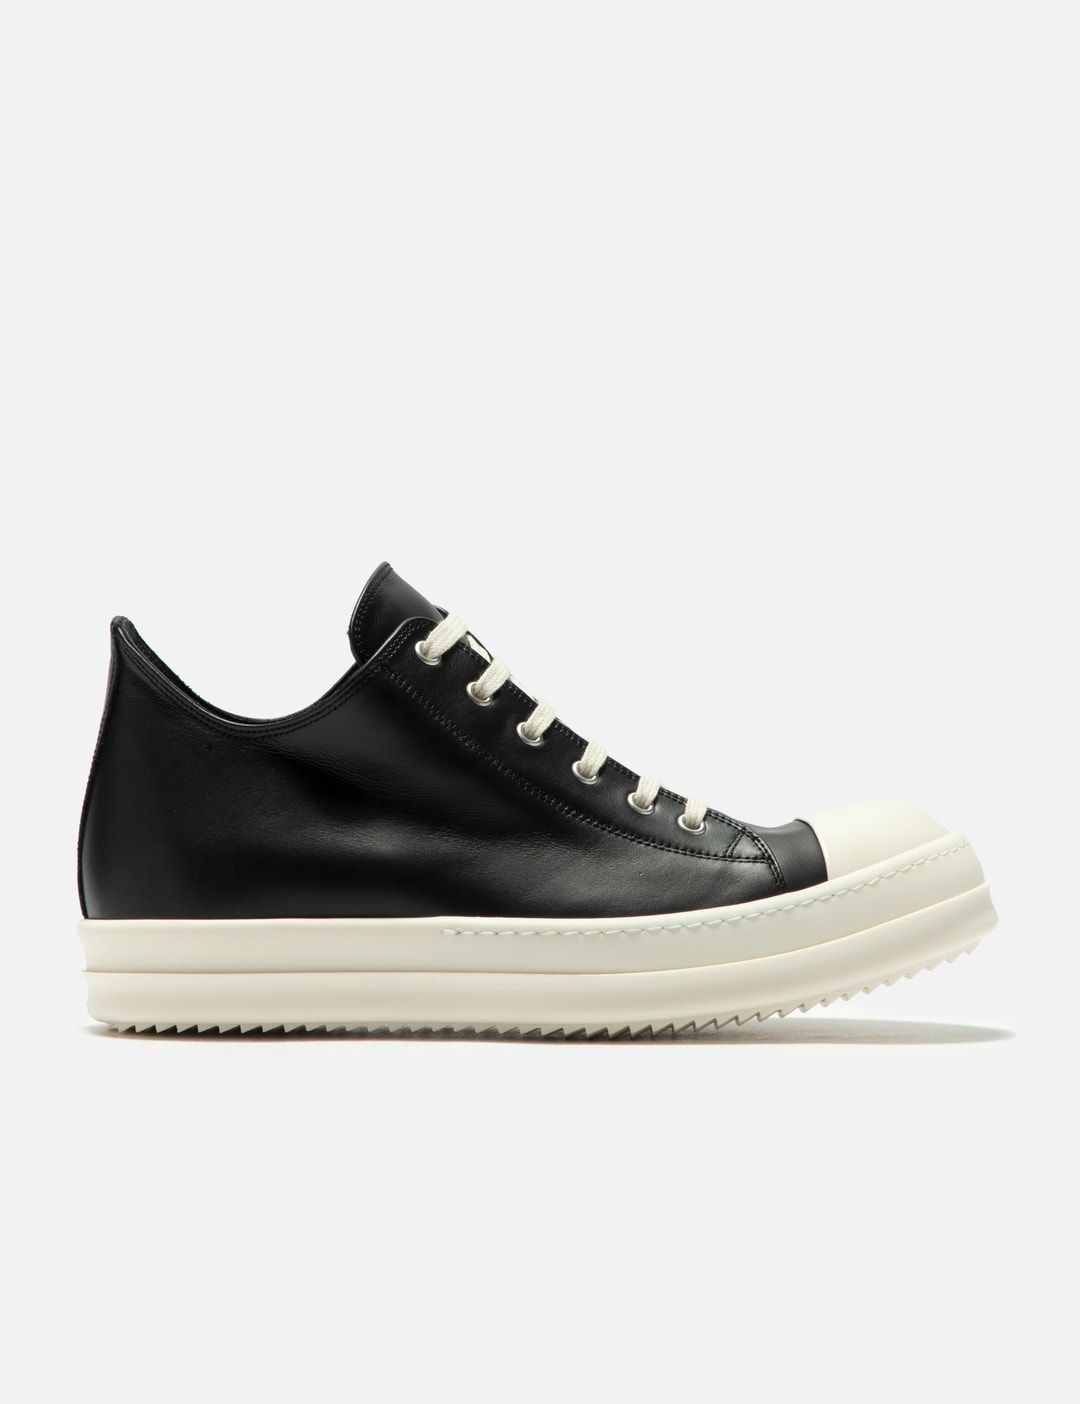 Rick Owens - Low Sneakers | HBX - Globally Curated Fashion and ...